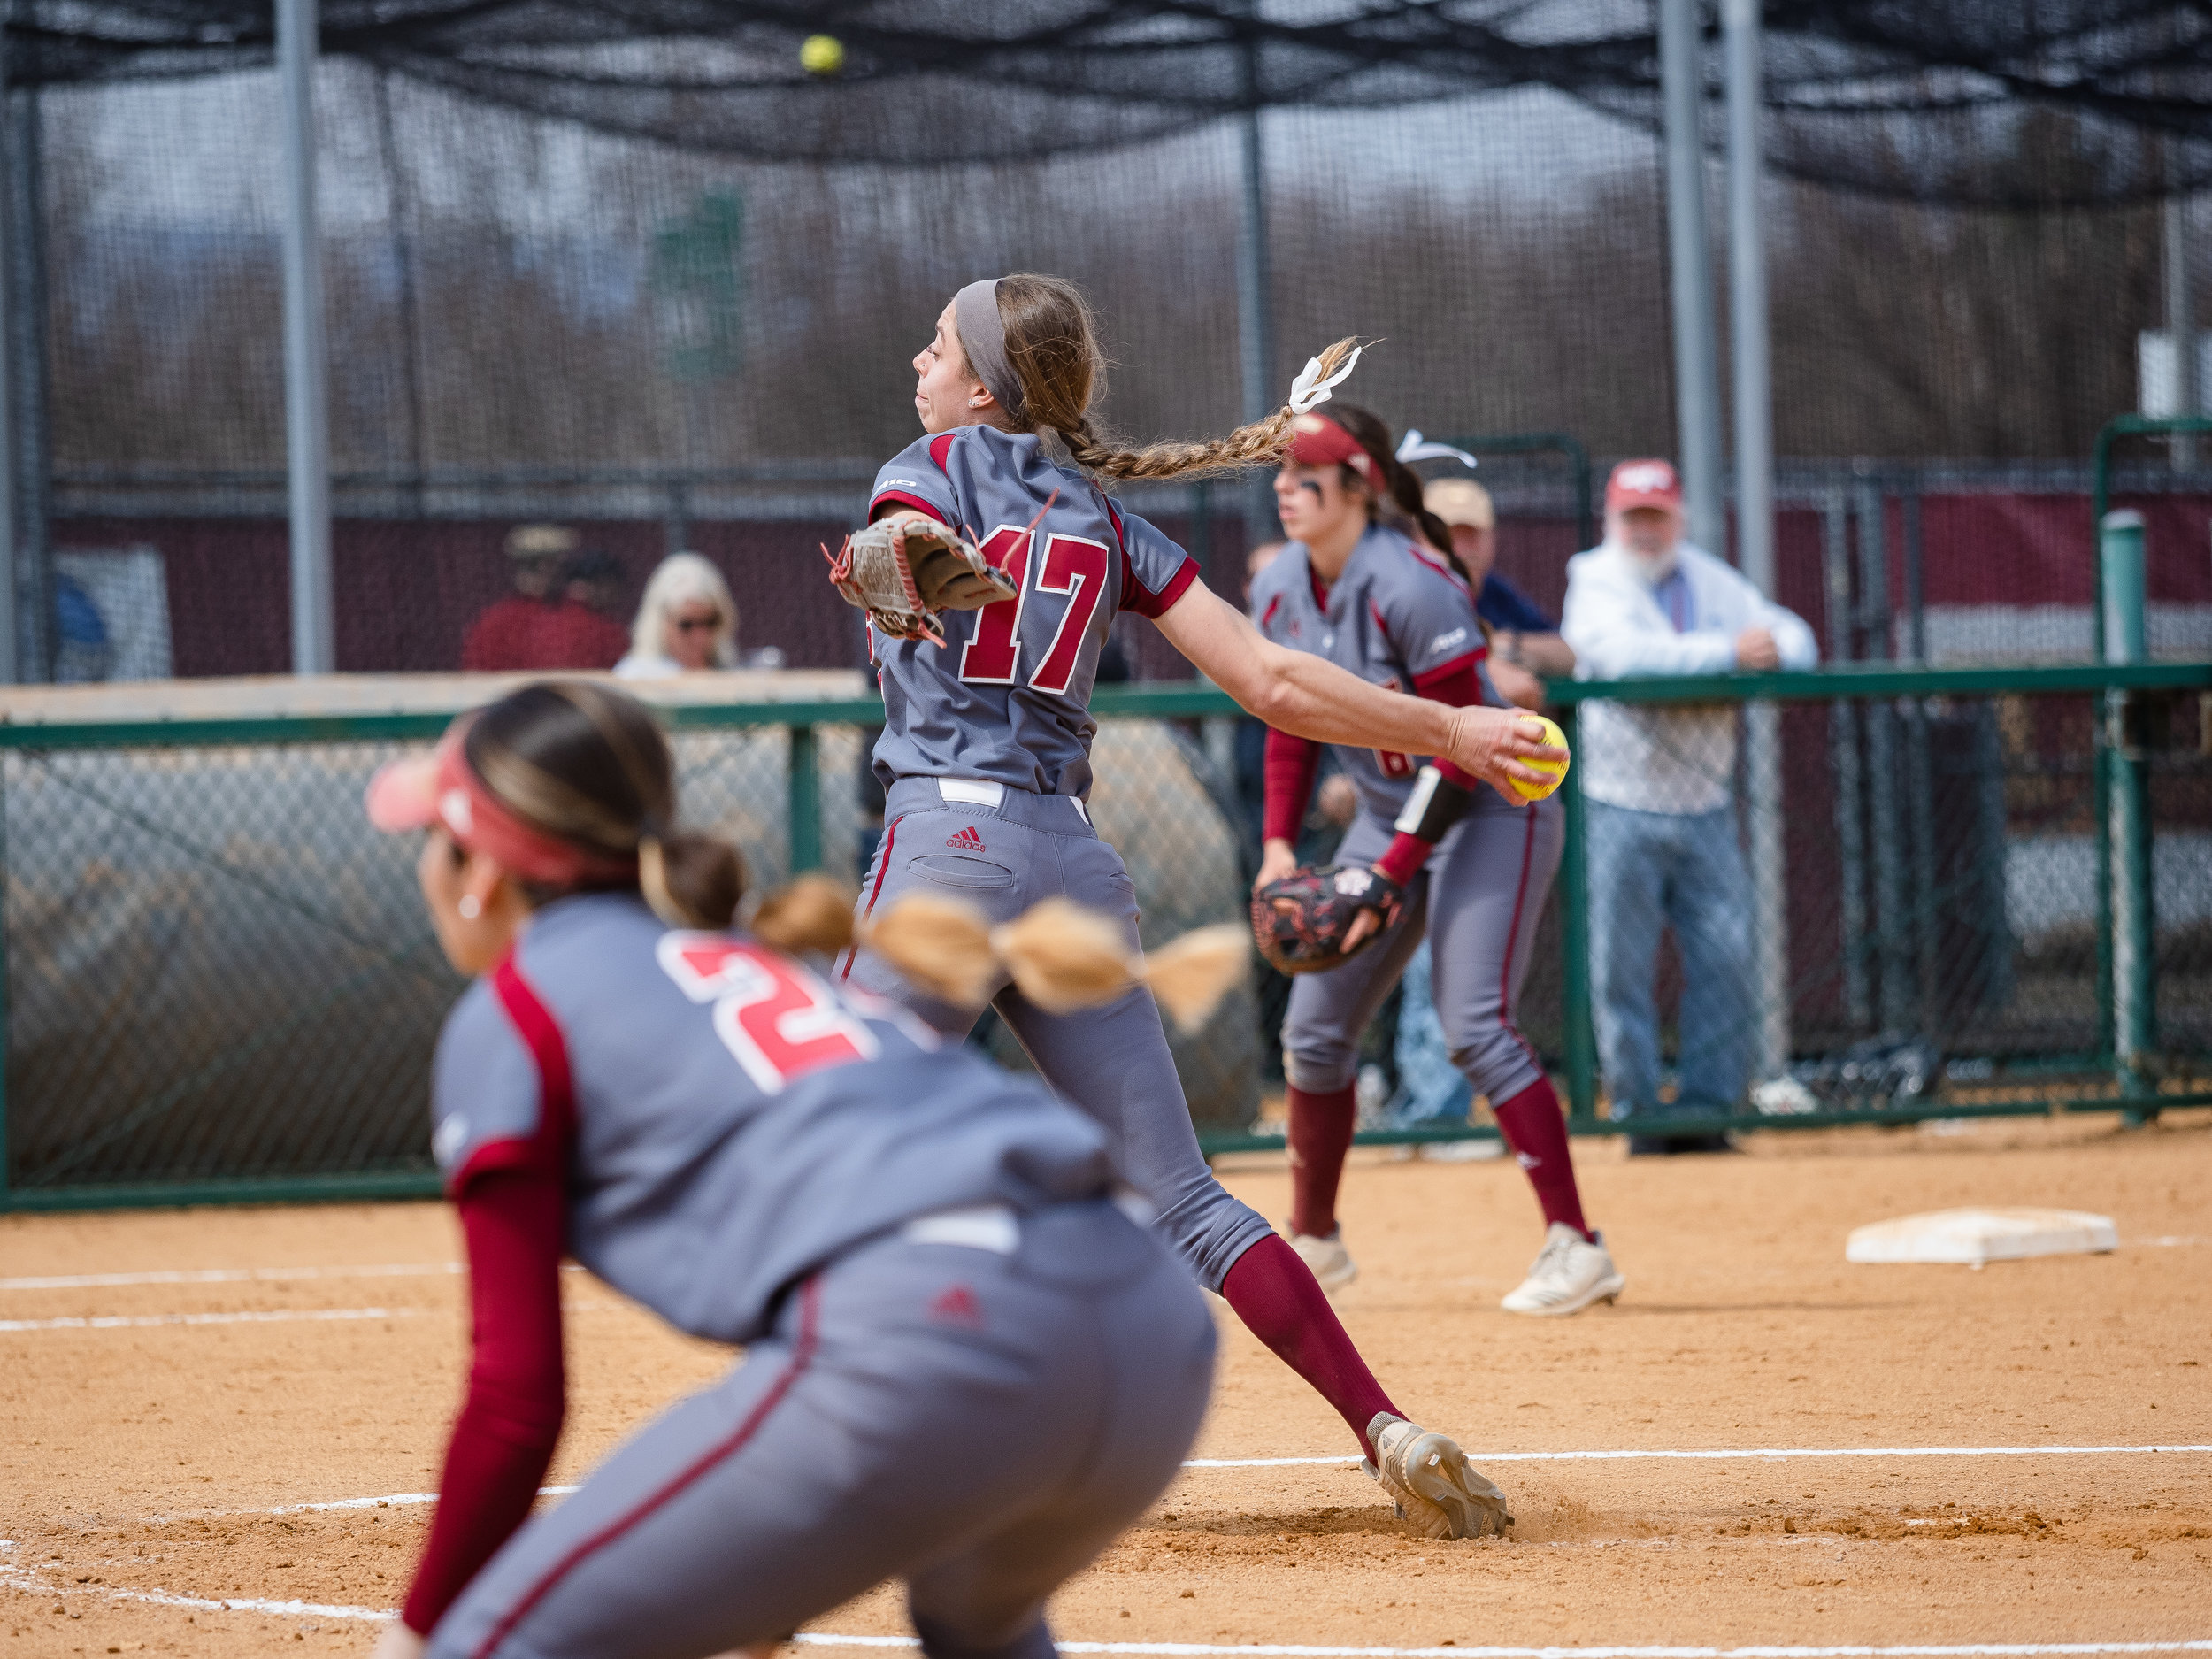  Softball vs La Salle in third game of series on Sunday, April 7, 2019. 
(Photo by Judith Gibson-Okunieff) 